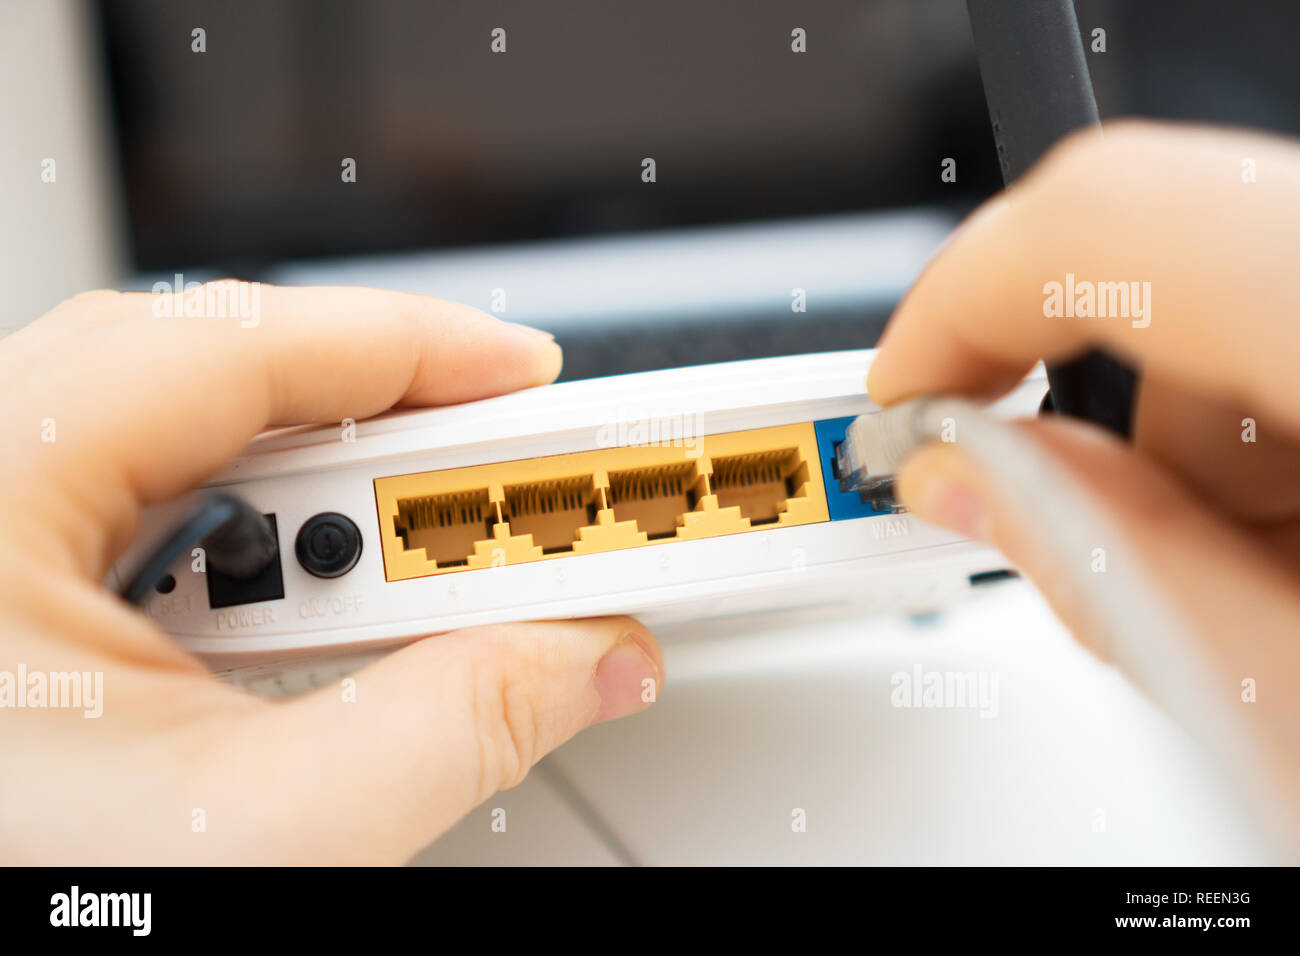 Man plugging internet cable into wifi router. Stock Photo